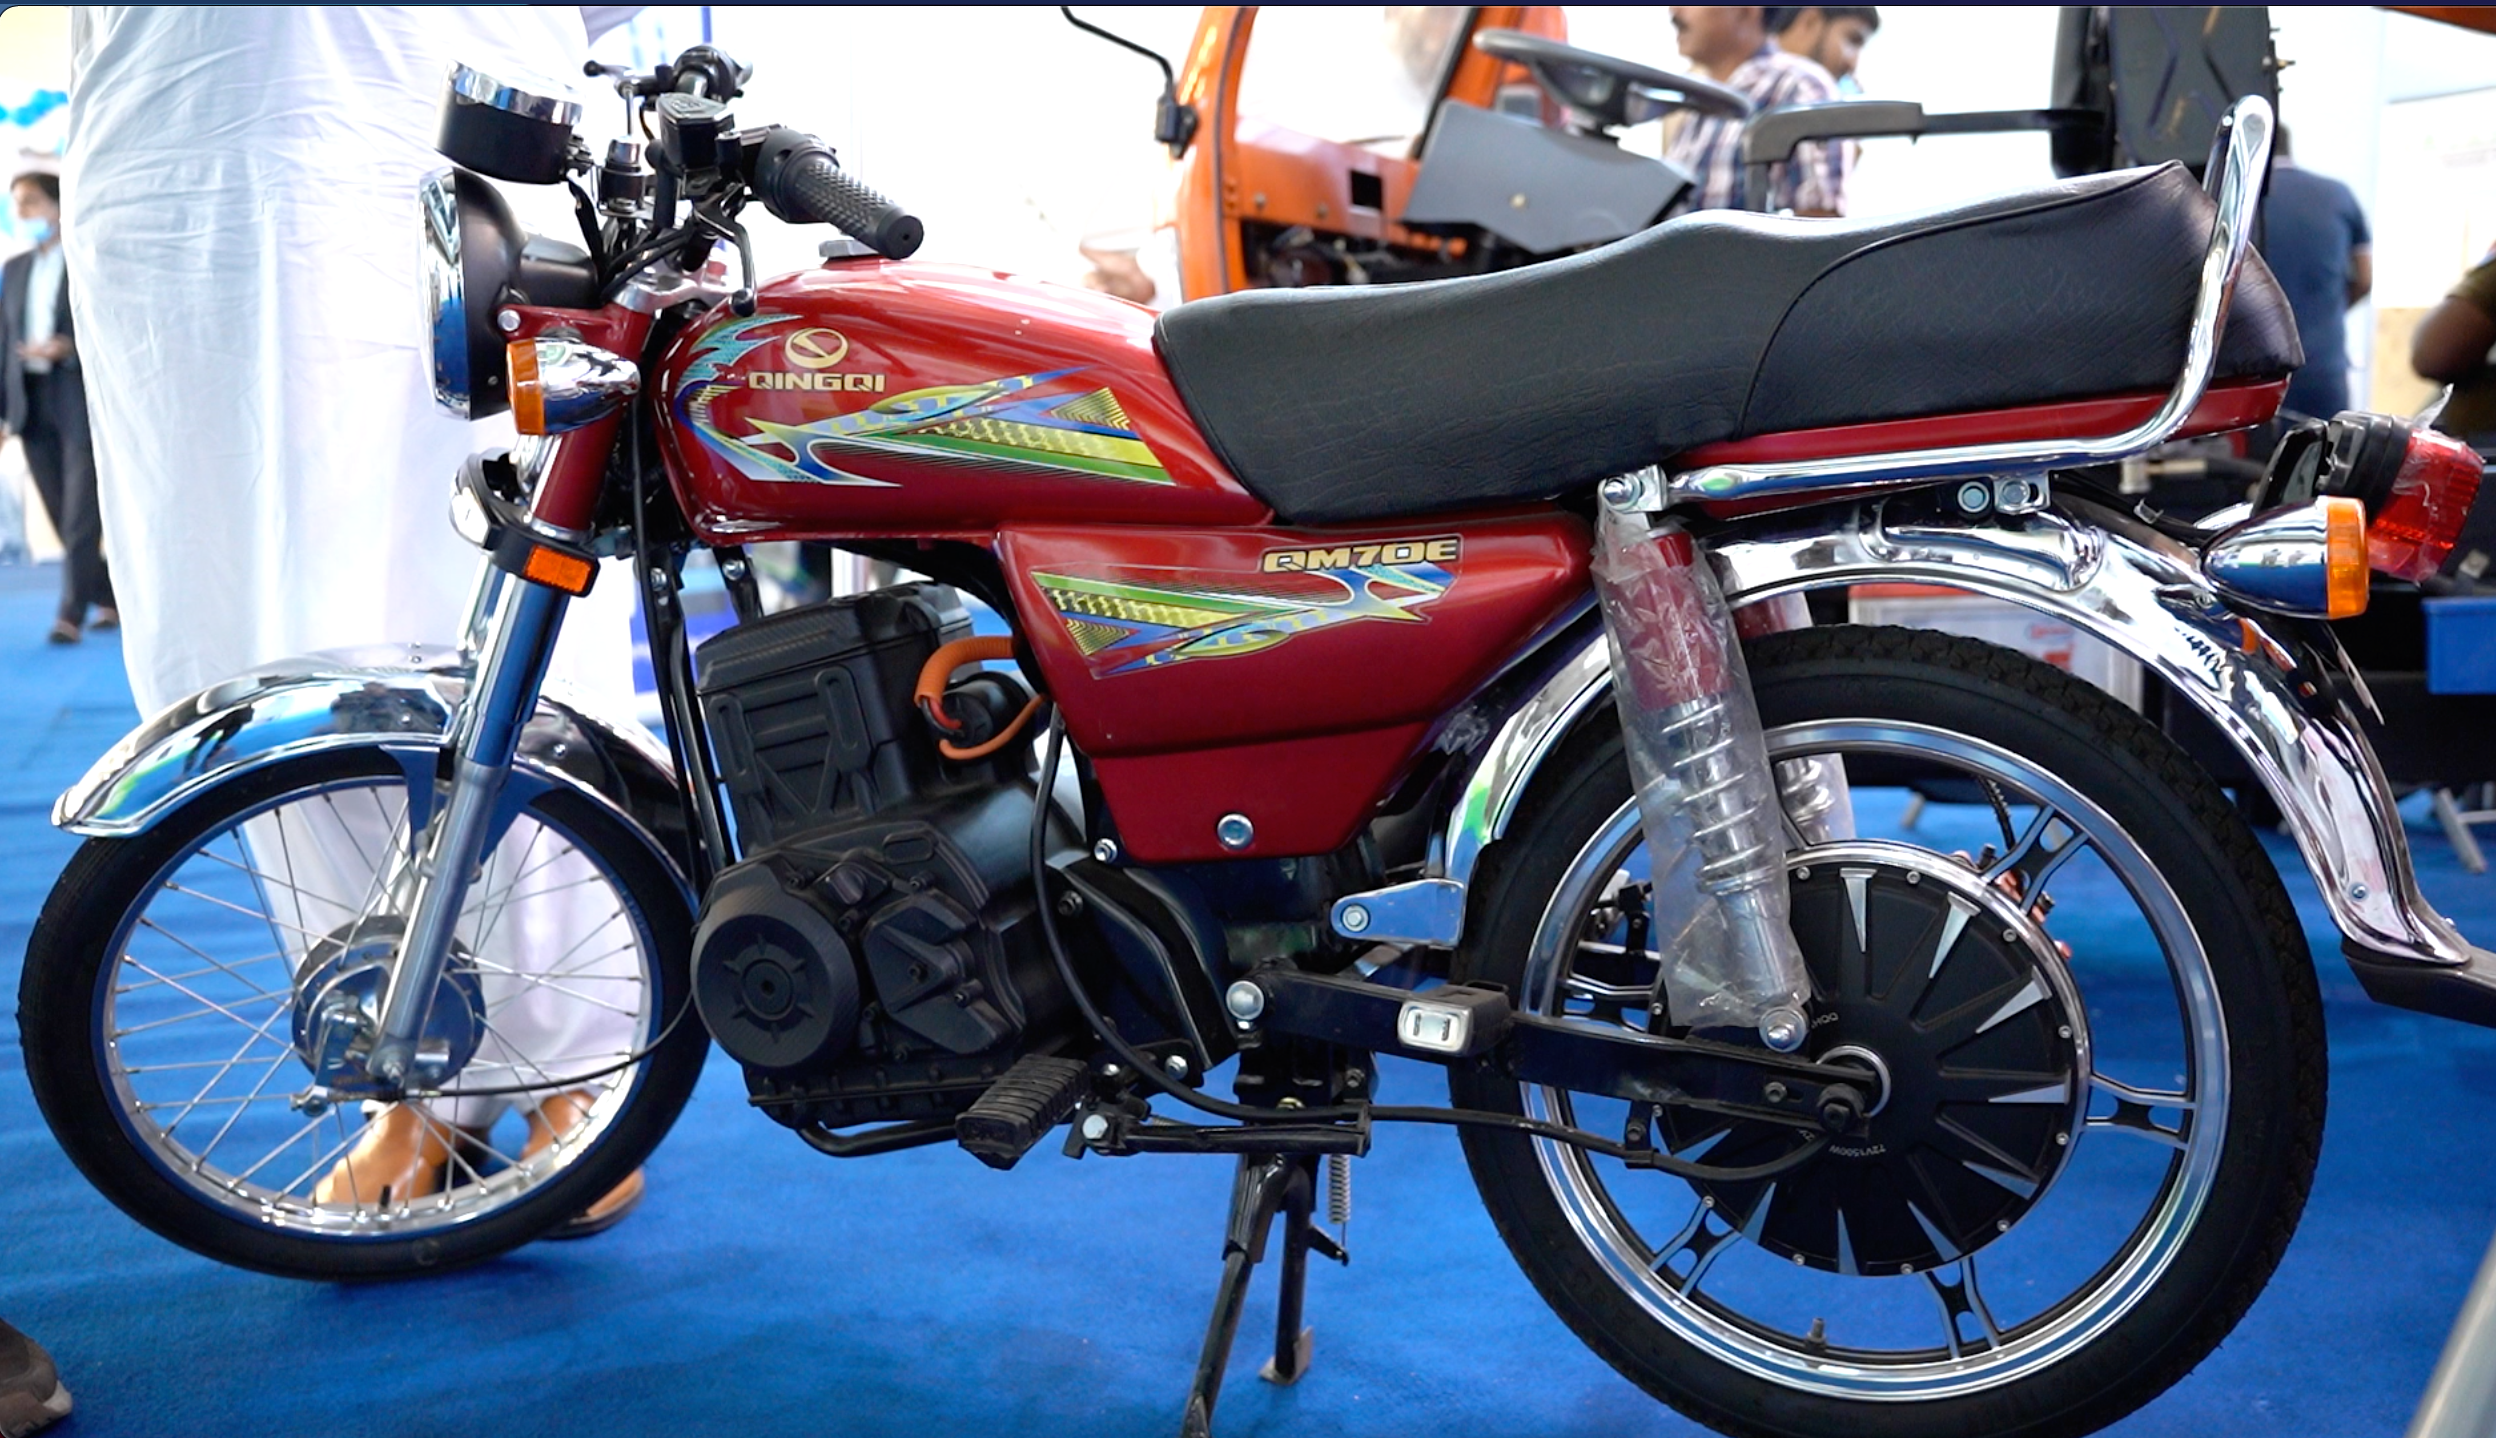 Chinese enterprises optimistic about Pakistan’s electric motorcycle industry